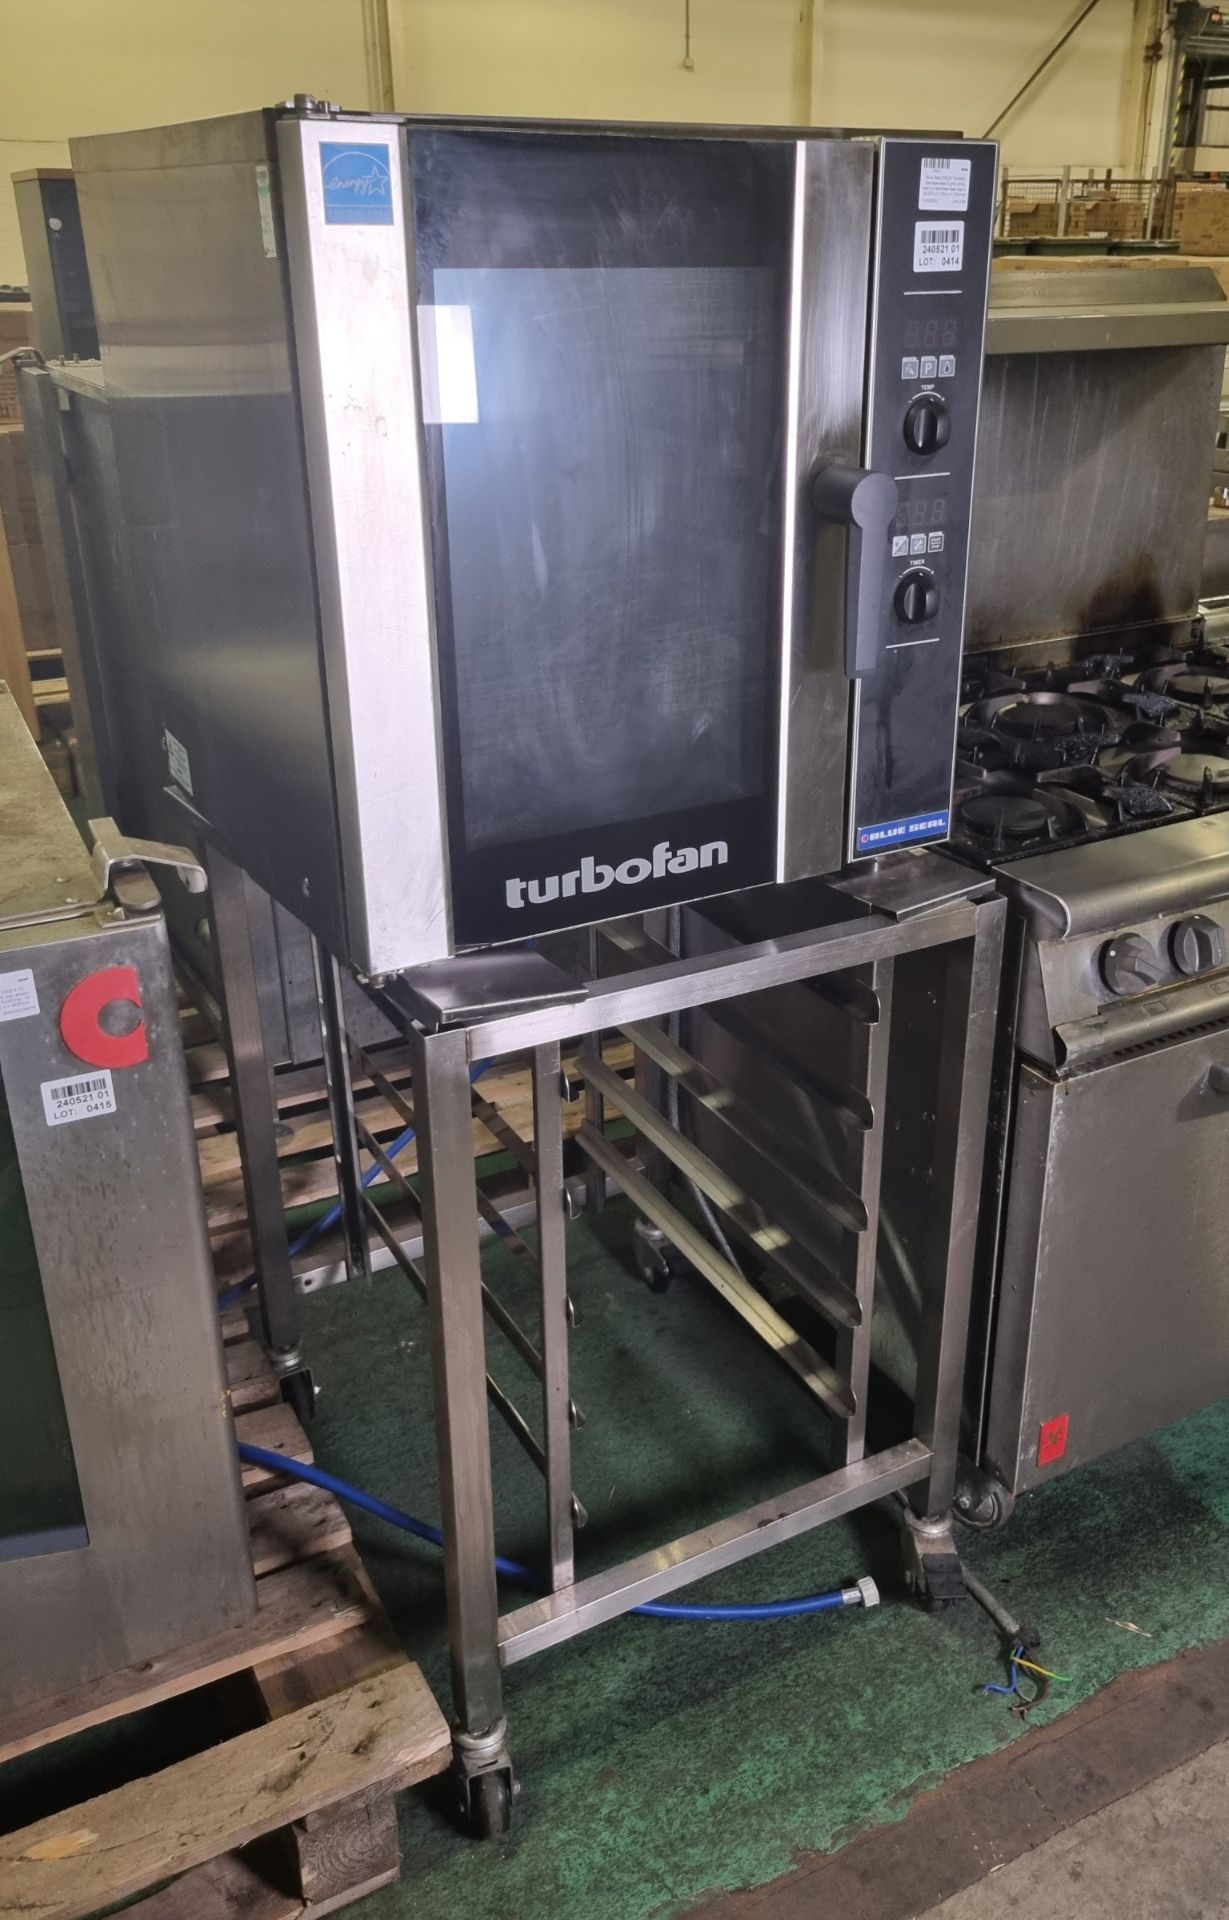 Blue Seal E33D5 Turbofan stainless steel 5 grid combi oven on stainless steel stand - 240V - 50Hz - Image 2 of 6